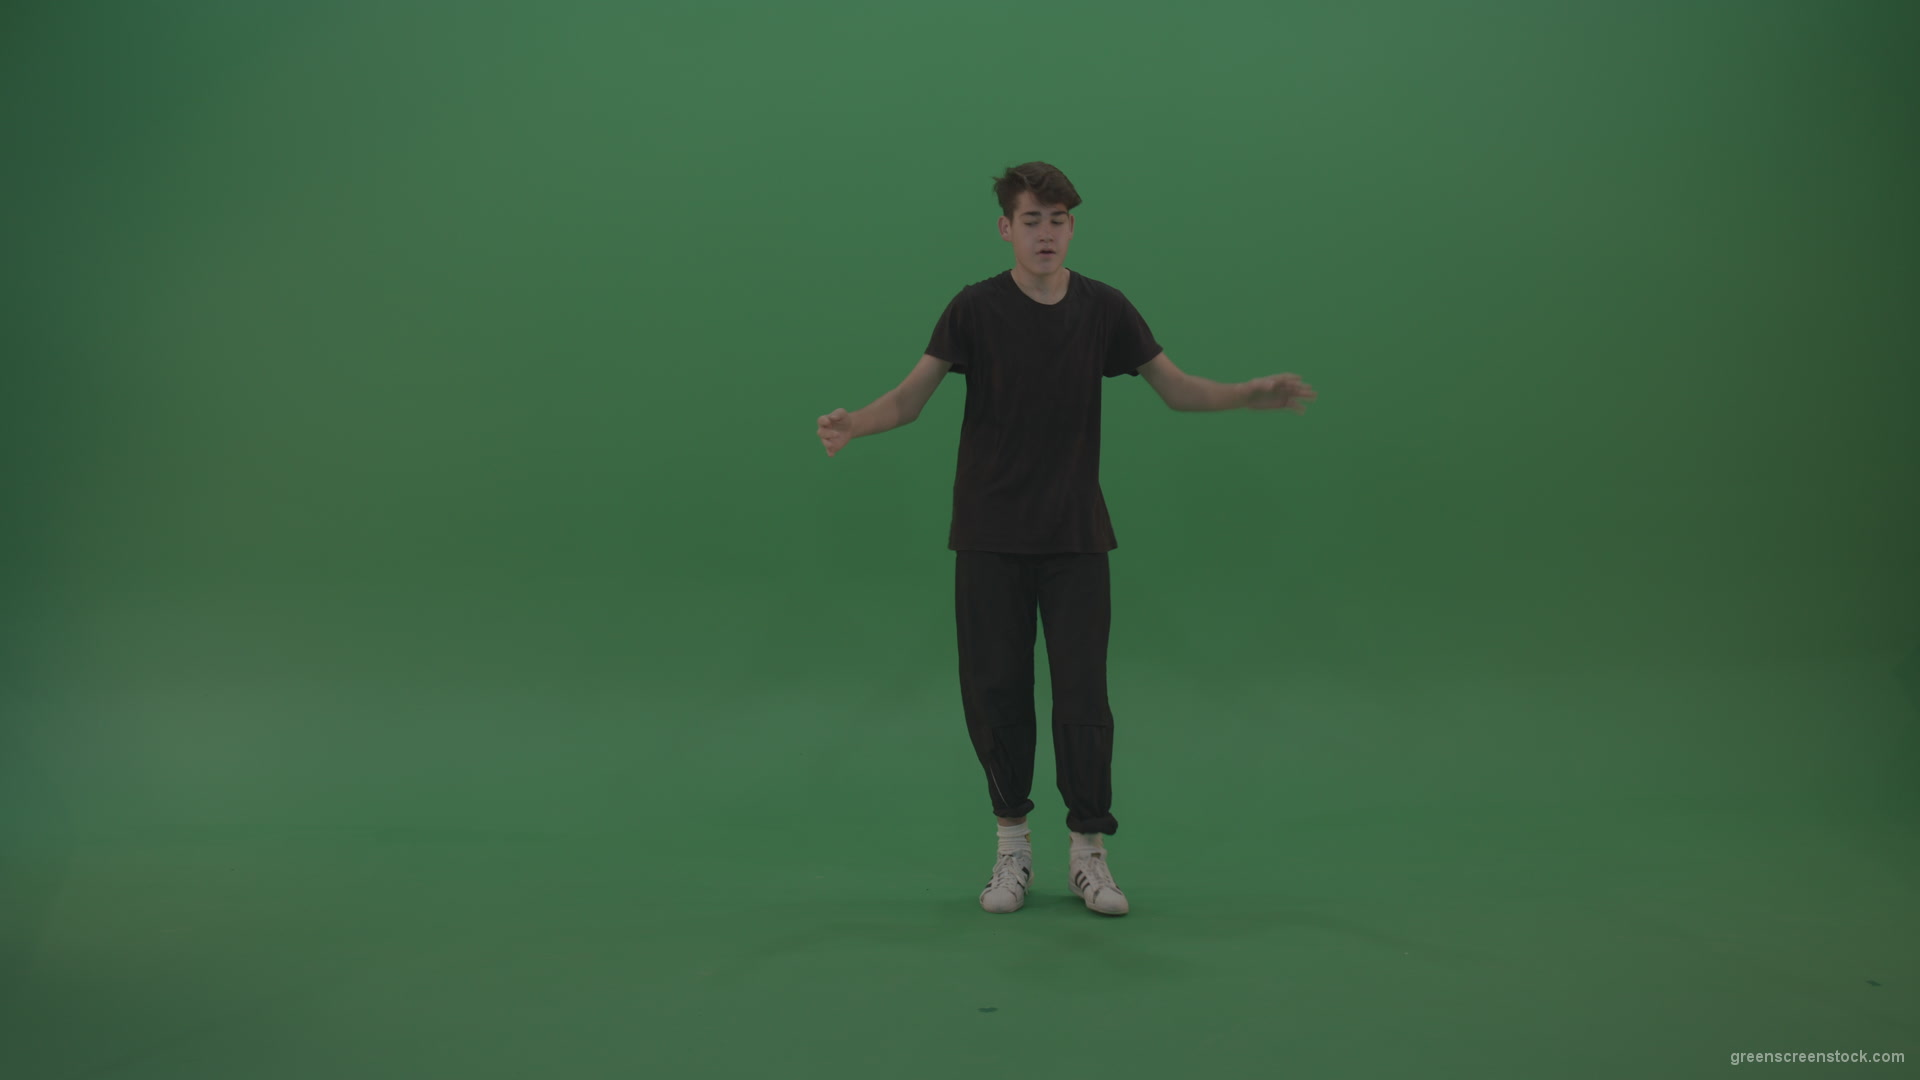 Young_Brunette_Boy_Showing_Awesome_Hip_Hop_Dance_Technical_Skills_With_Robot_Tought_Moves_On_Green_Screen_Chroma_Key_Background_007 Green Screen Stock